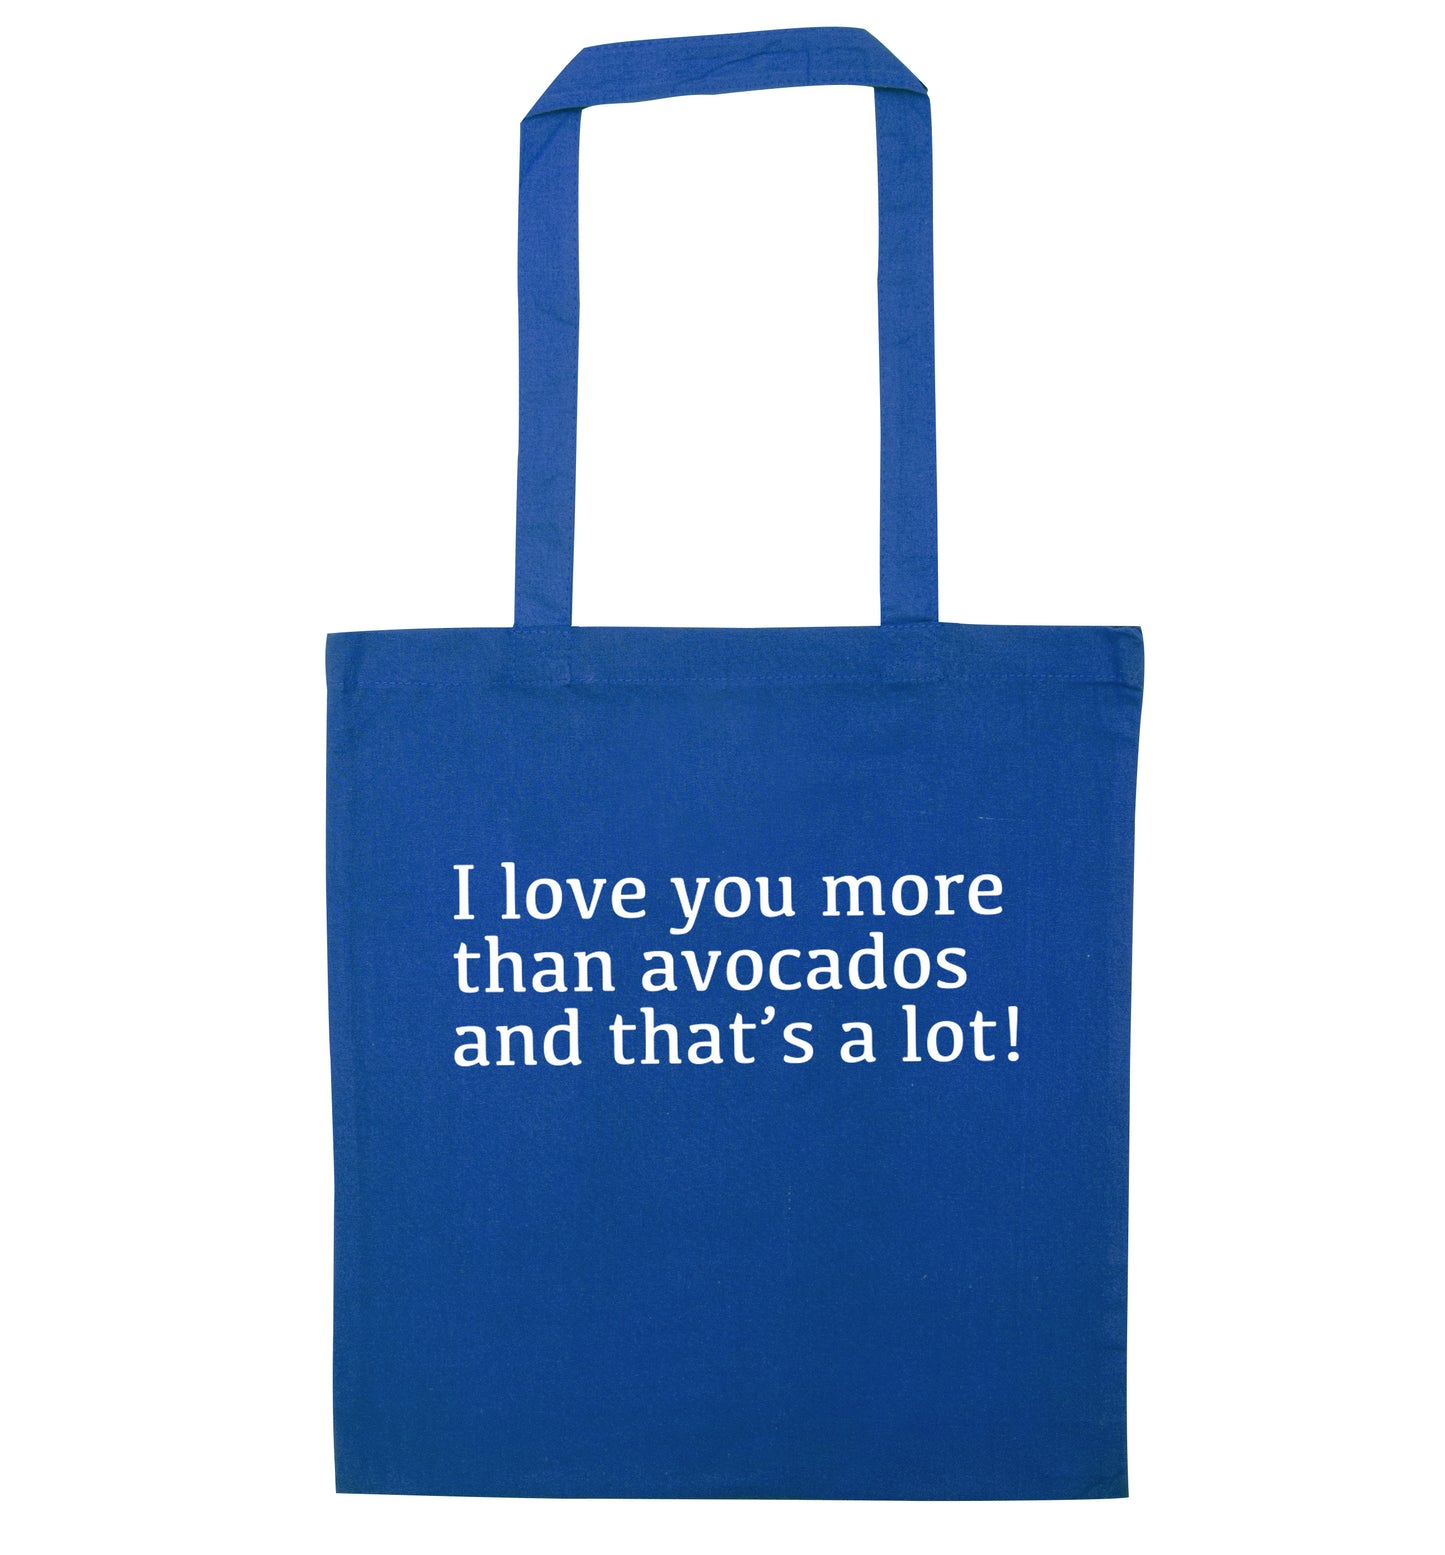 I love you more than avocados and that's a lot blue tote bag